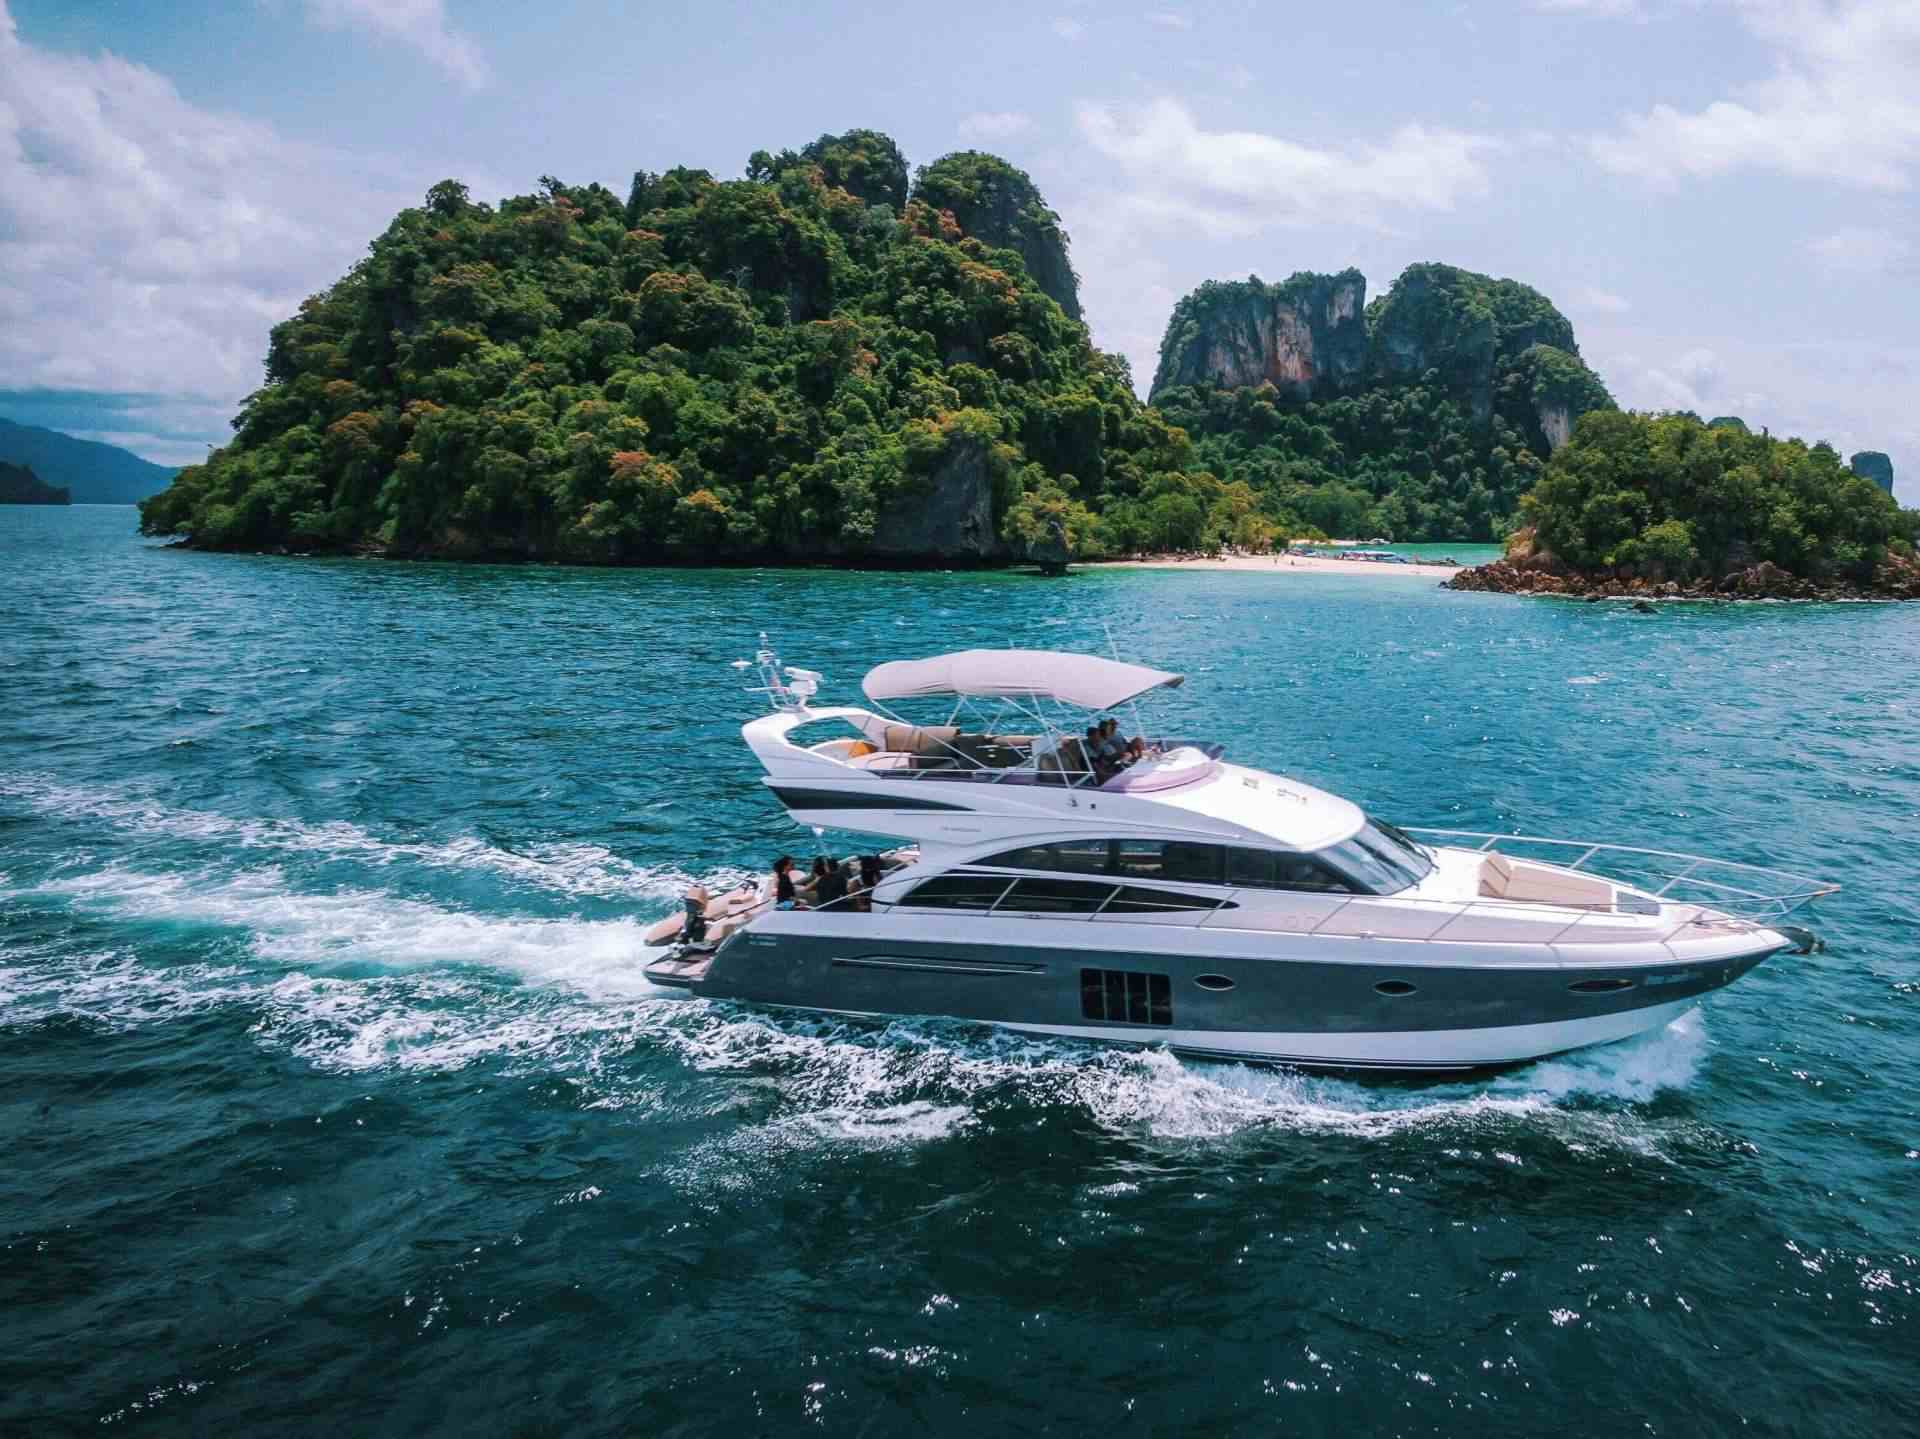 mayavee - Yacht Charter Koh Chang & Boat hire in SE Asia 1